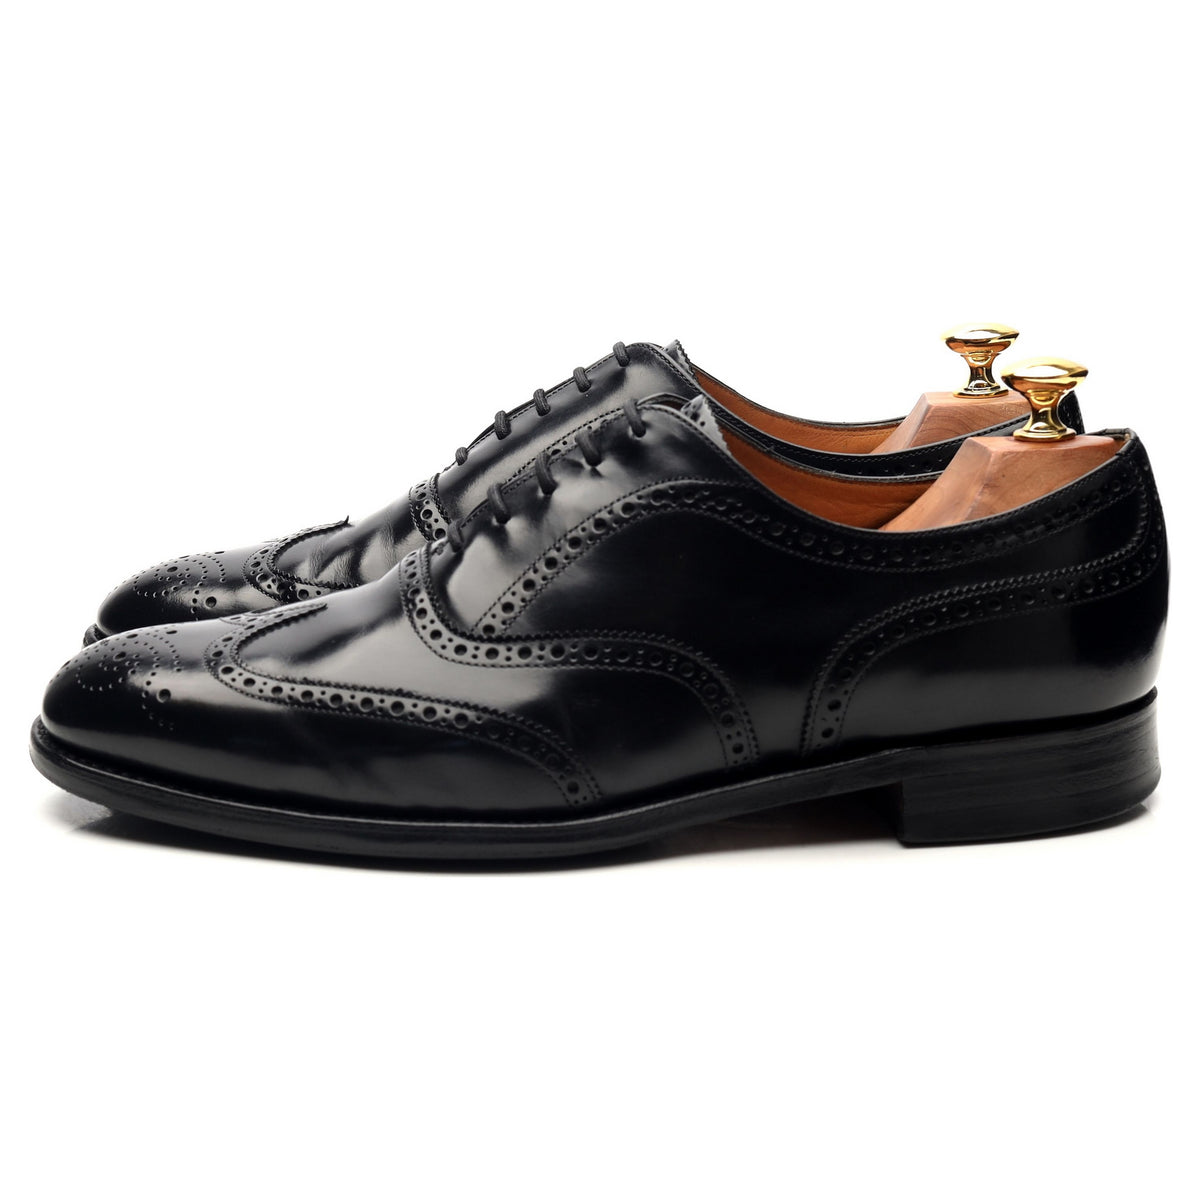 Black Leather Oxford Brogues UK 9.5 G